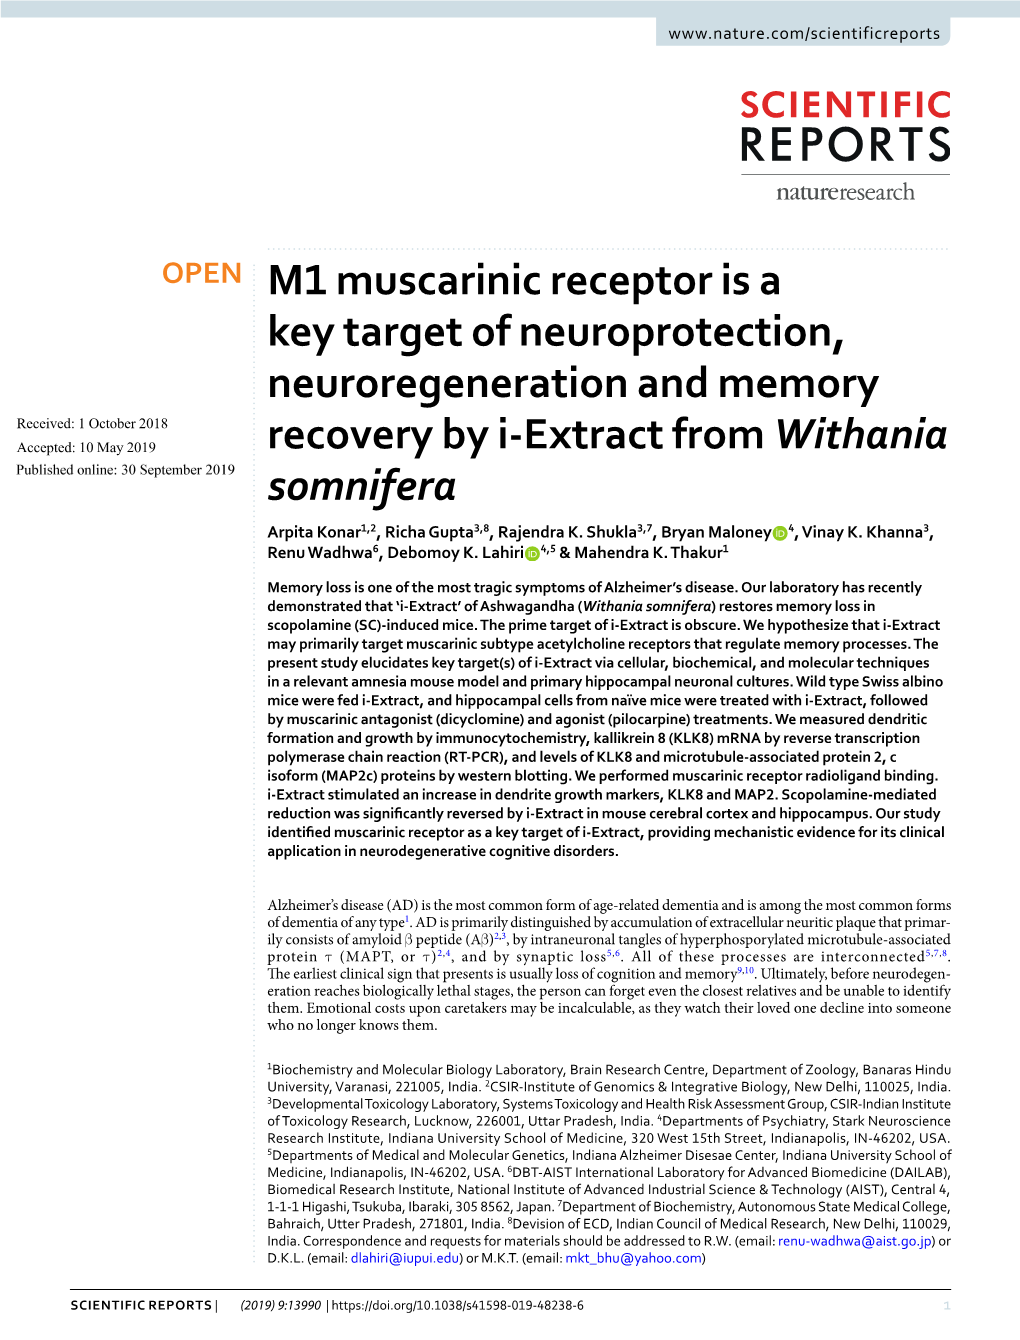 M1 Muscarinic Receptor Is a Key Target of Neuroprotection